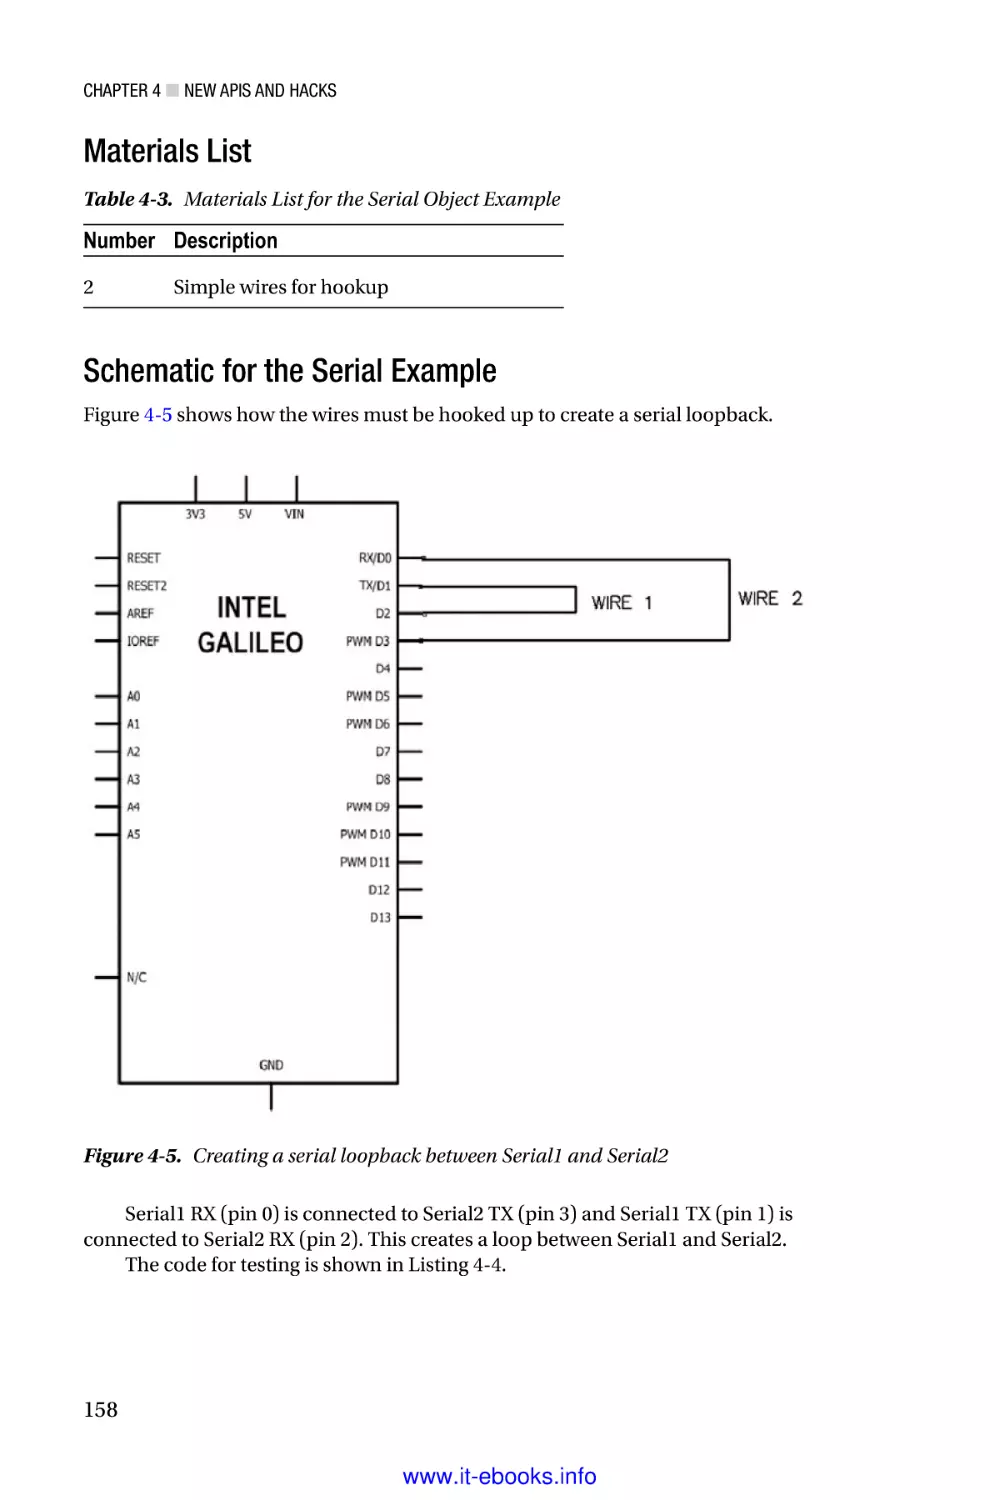 Materials List
Schematic for the Serial Example